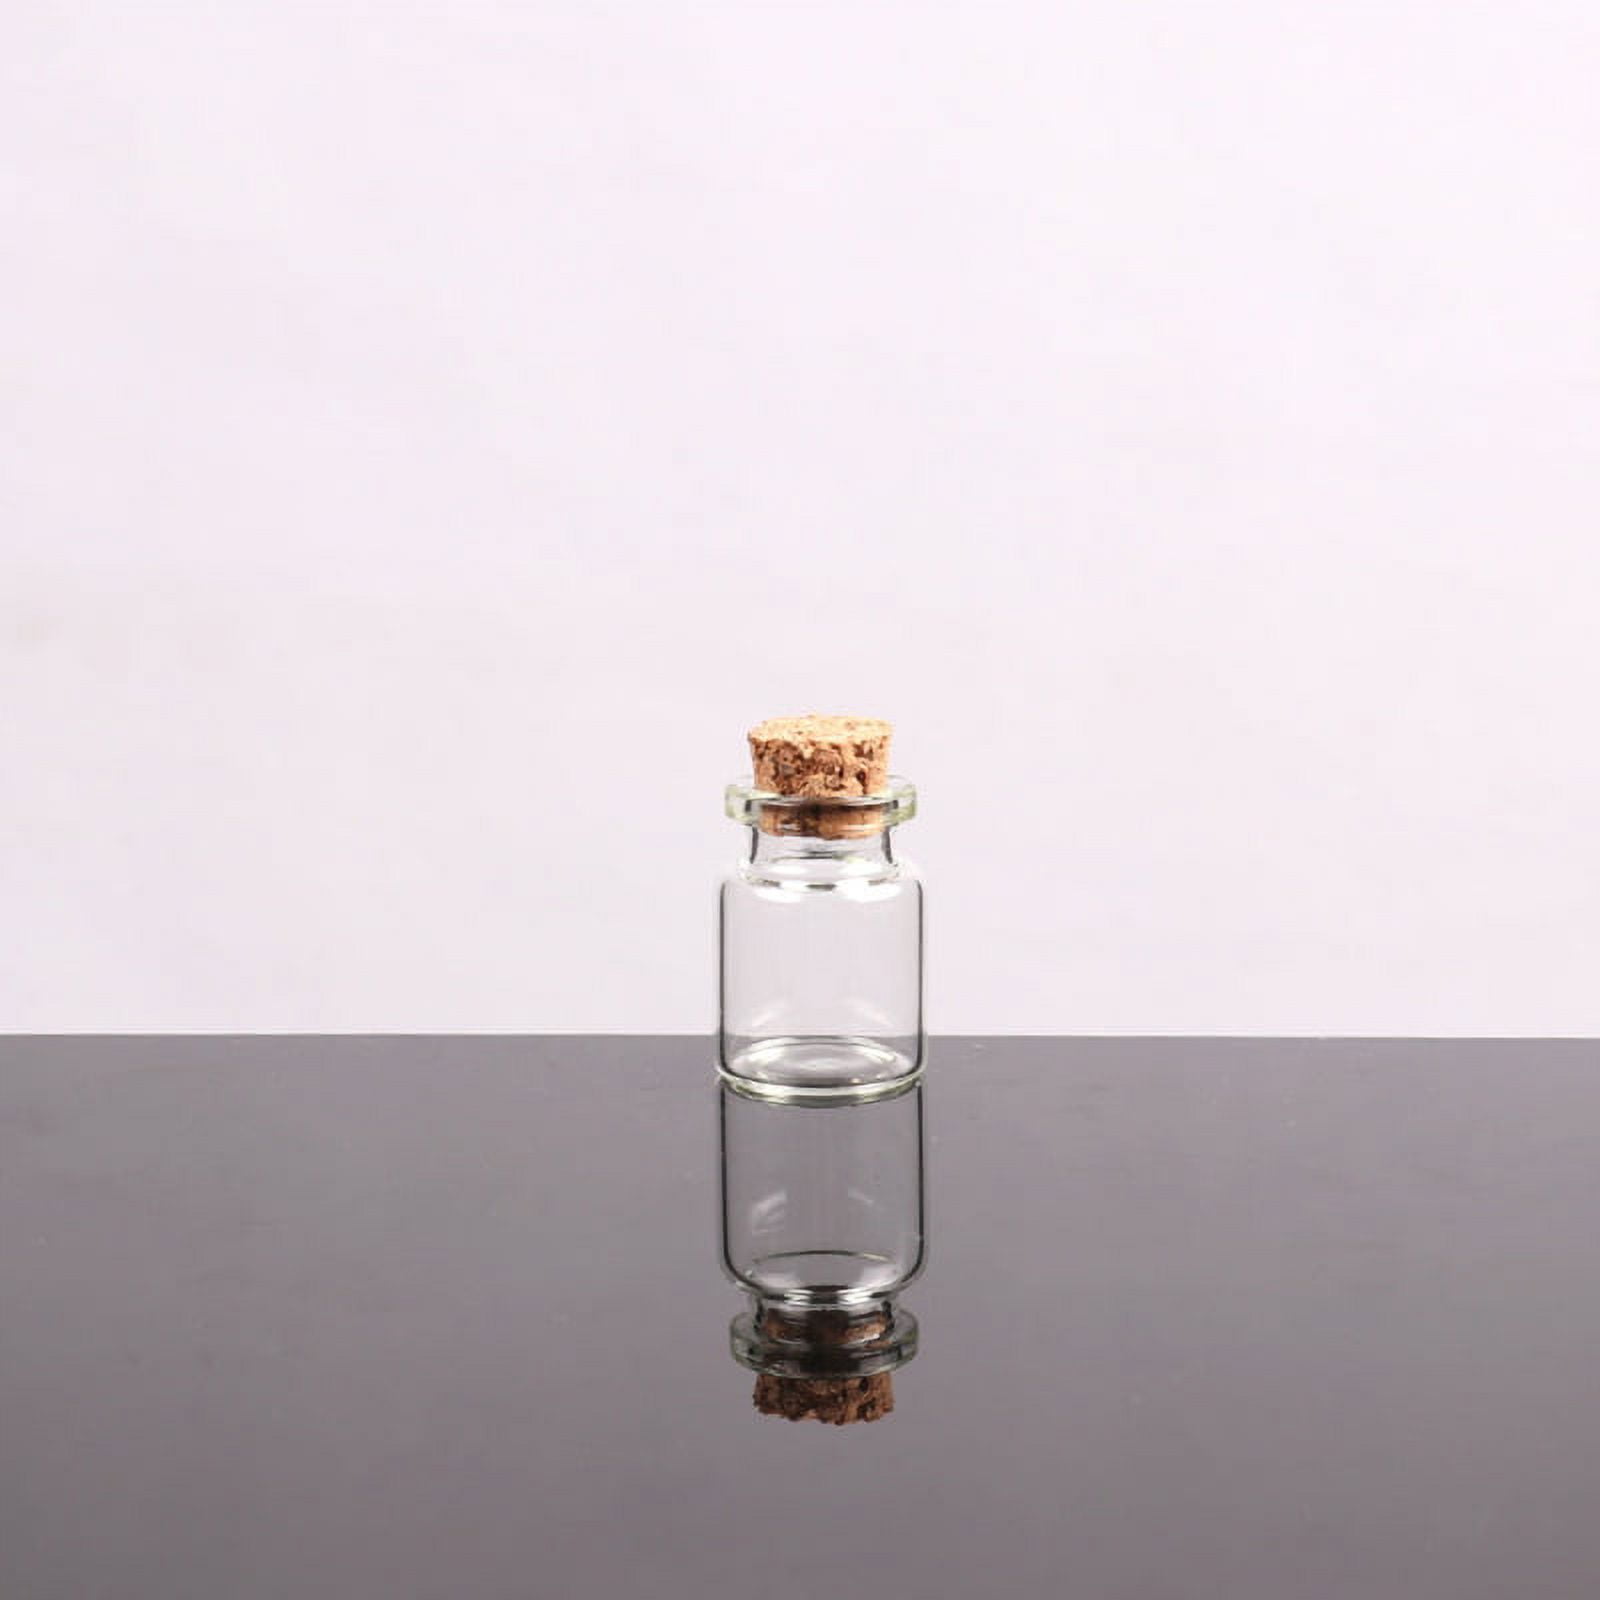 YEUHTLL Small Bottles with Cork Stoppers Tiny Vials Small Clear